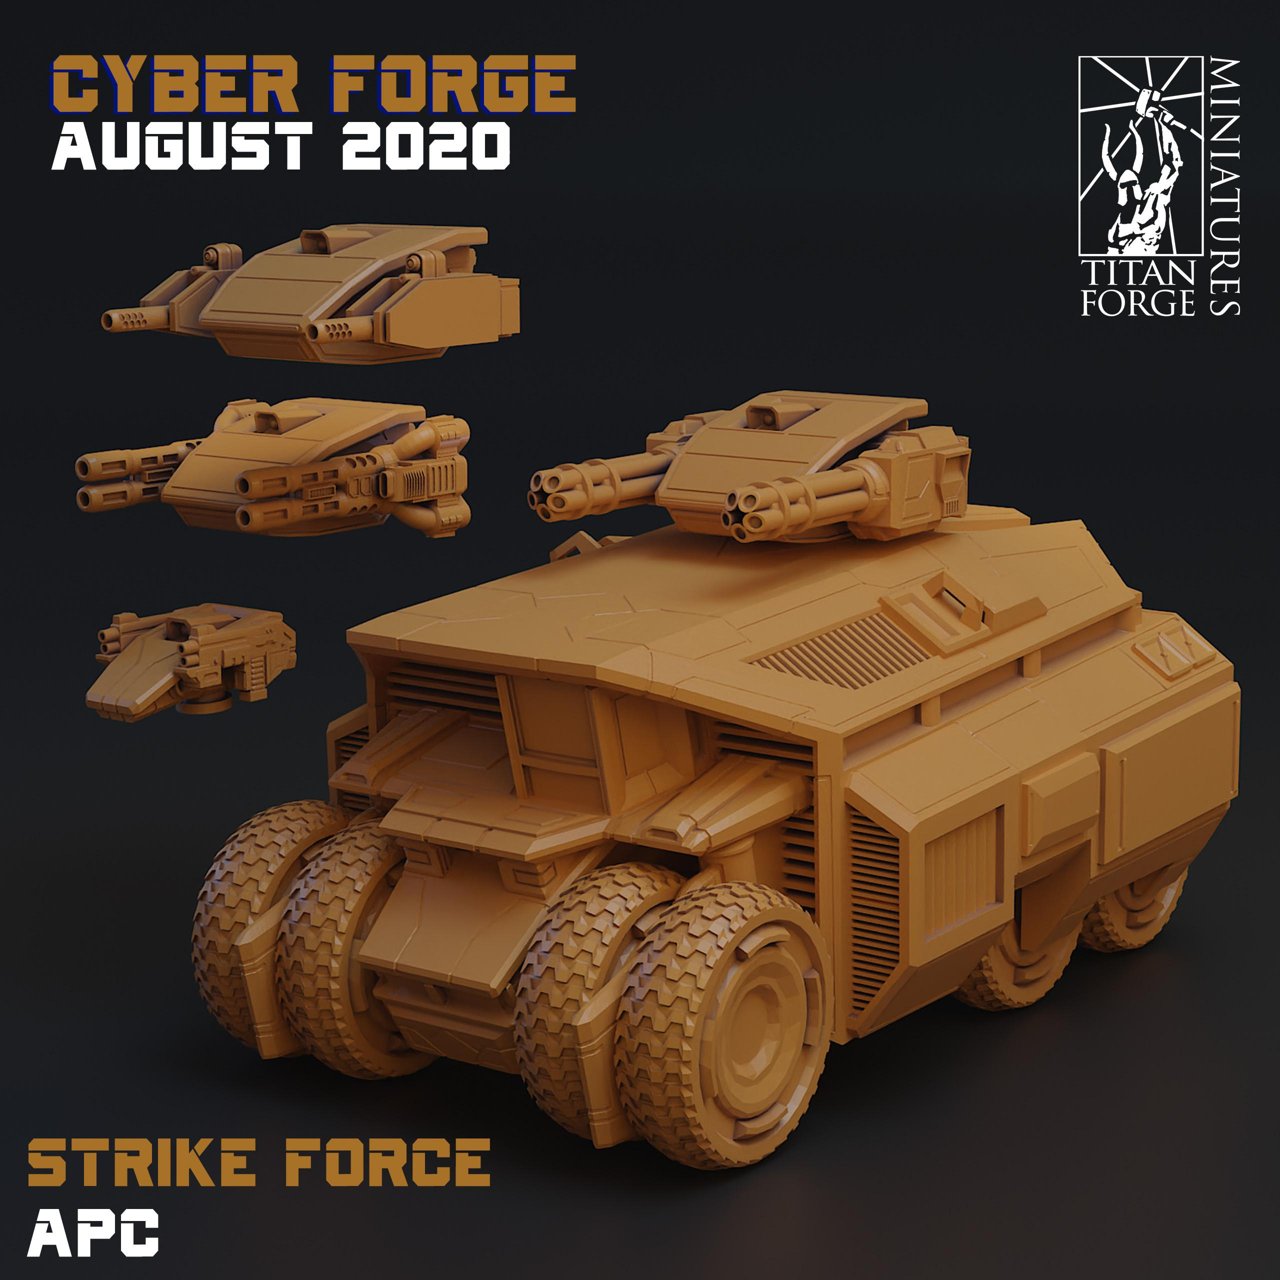 Cyber-Forge Miniatures August 2020 Cyber Forge  MINISTL 3